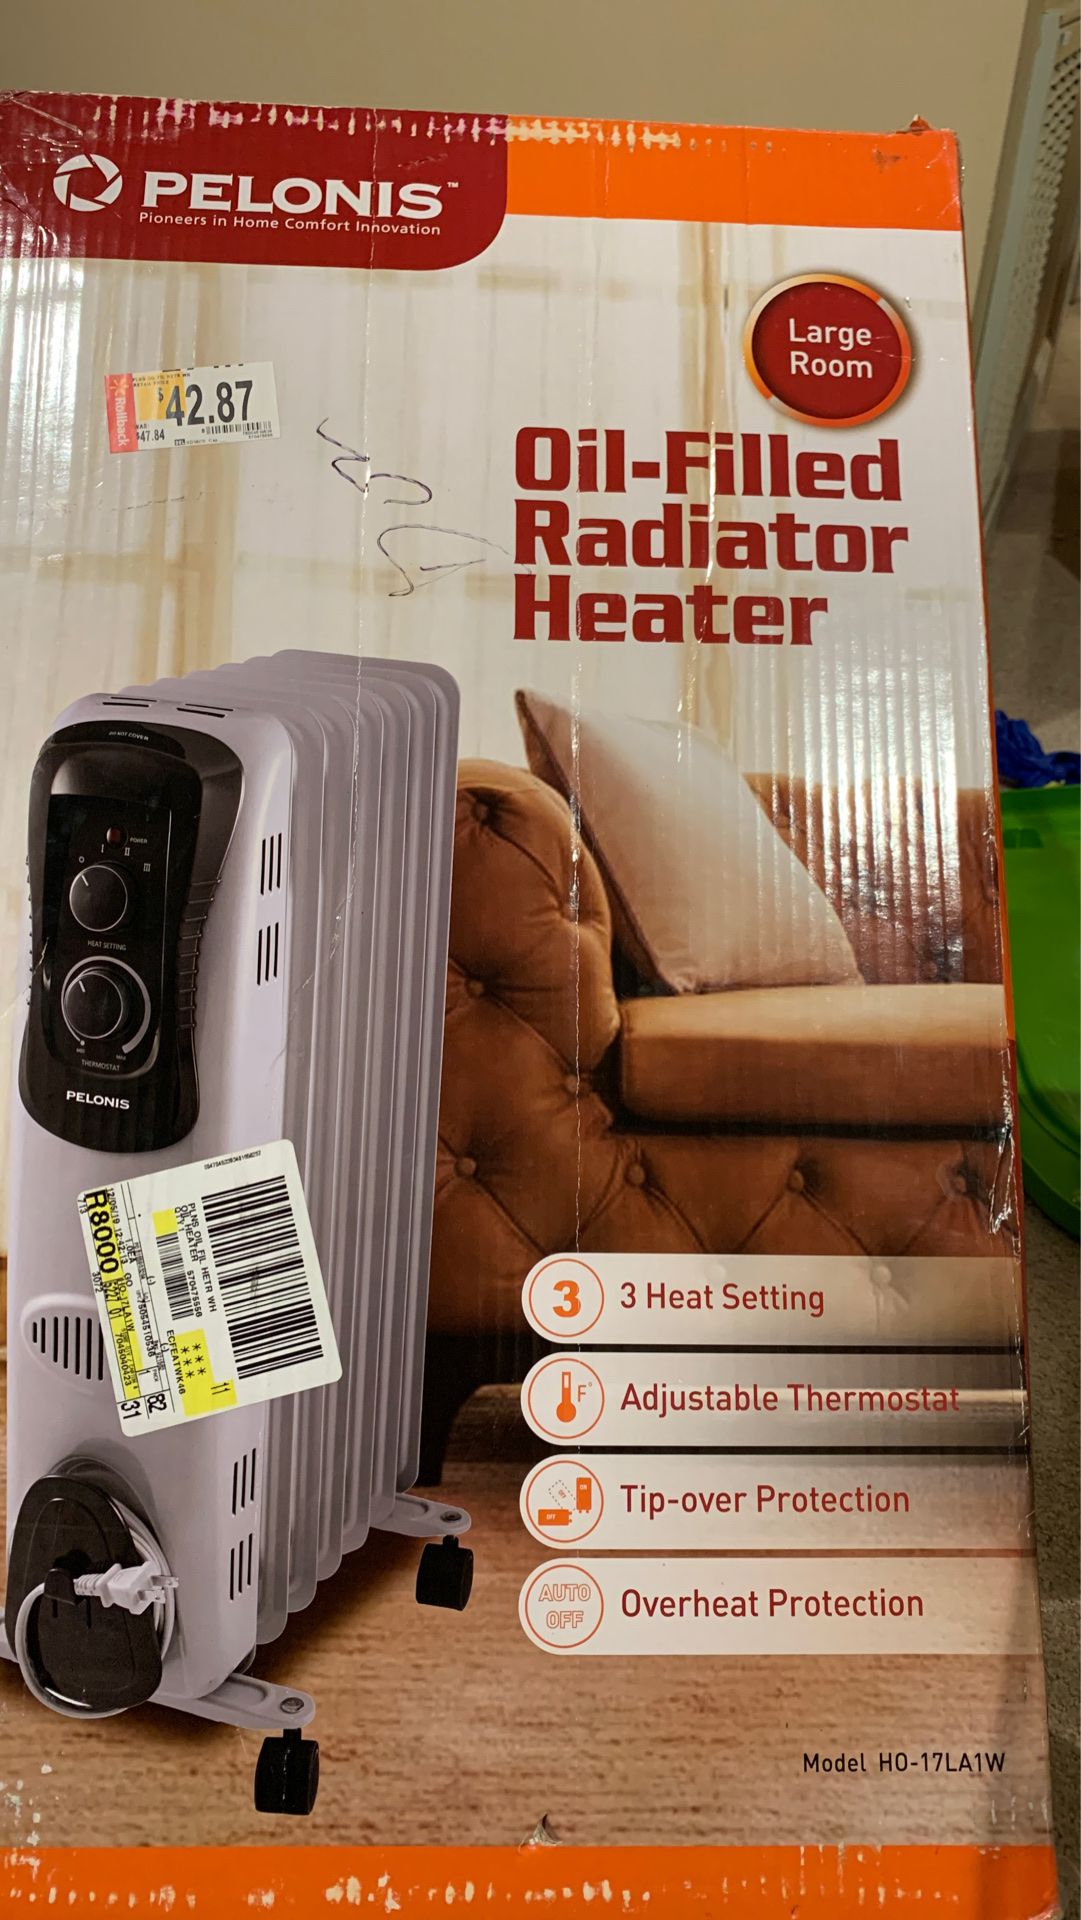 Brand new :DeLonghi Oil-Filled Radiator Space Heater, Quiet 1500W.